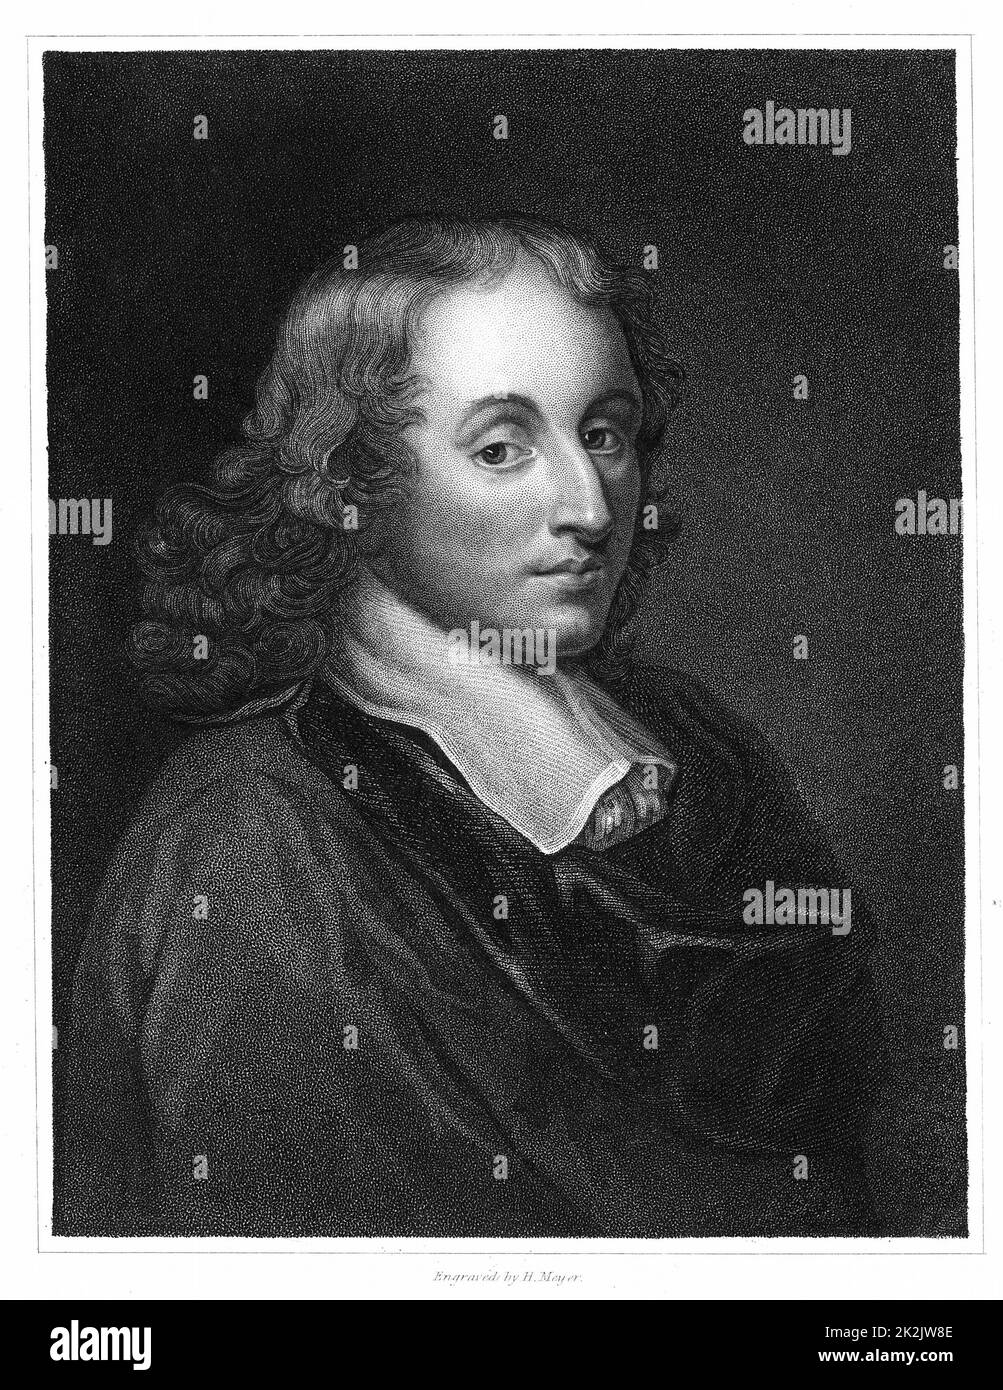 Blaise Pascal (1623-62) French philosopher, mathematician, physicist and theologian. Steel engraving c.1830 Stock Photo